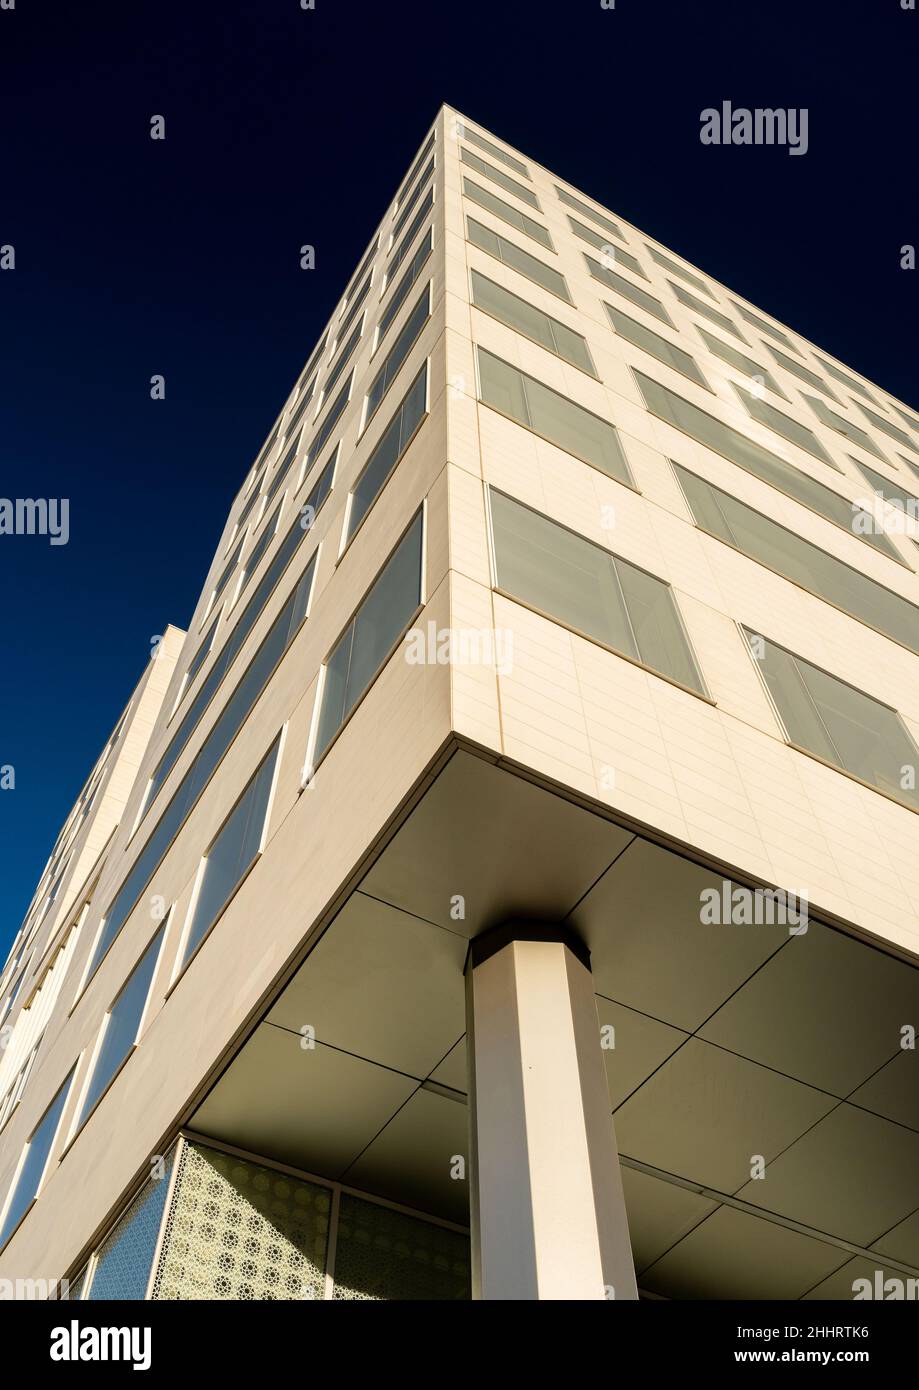 Detail of high rise tower block with windows and vents against a blue sky Stock Photo